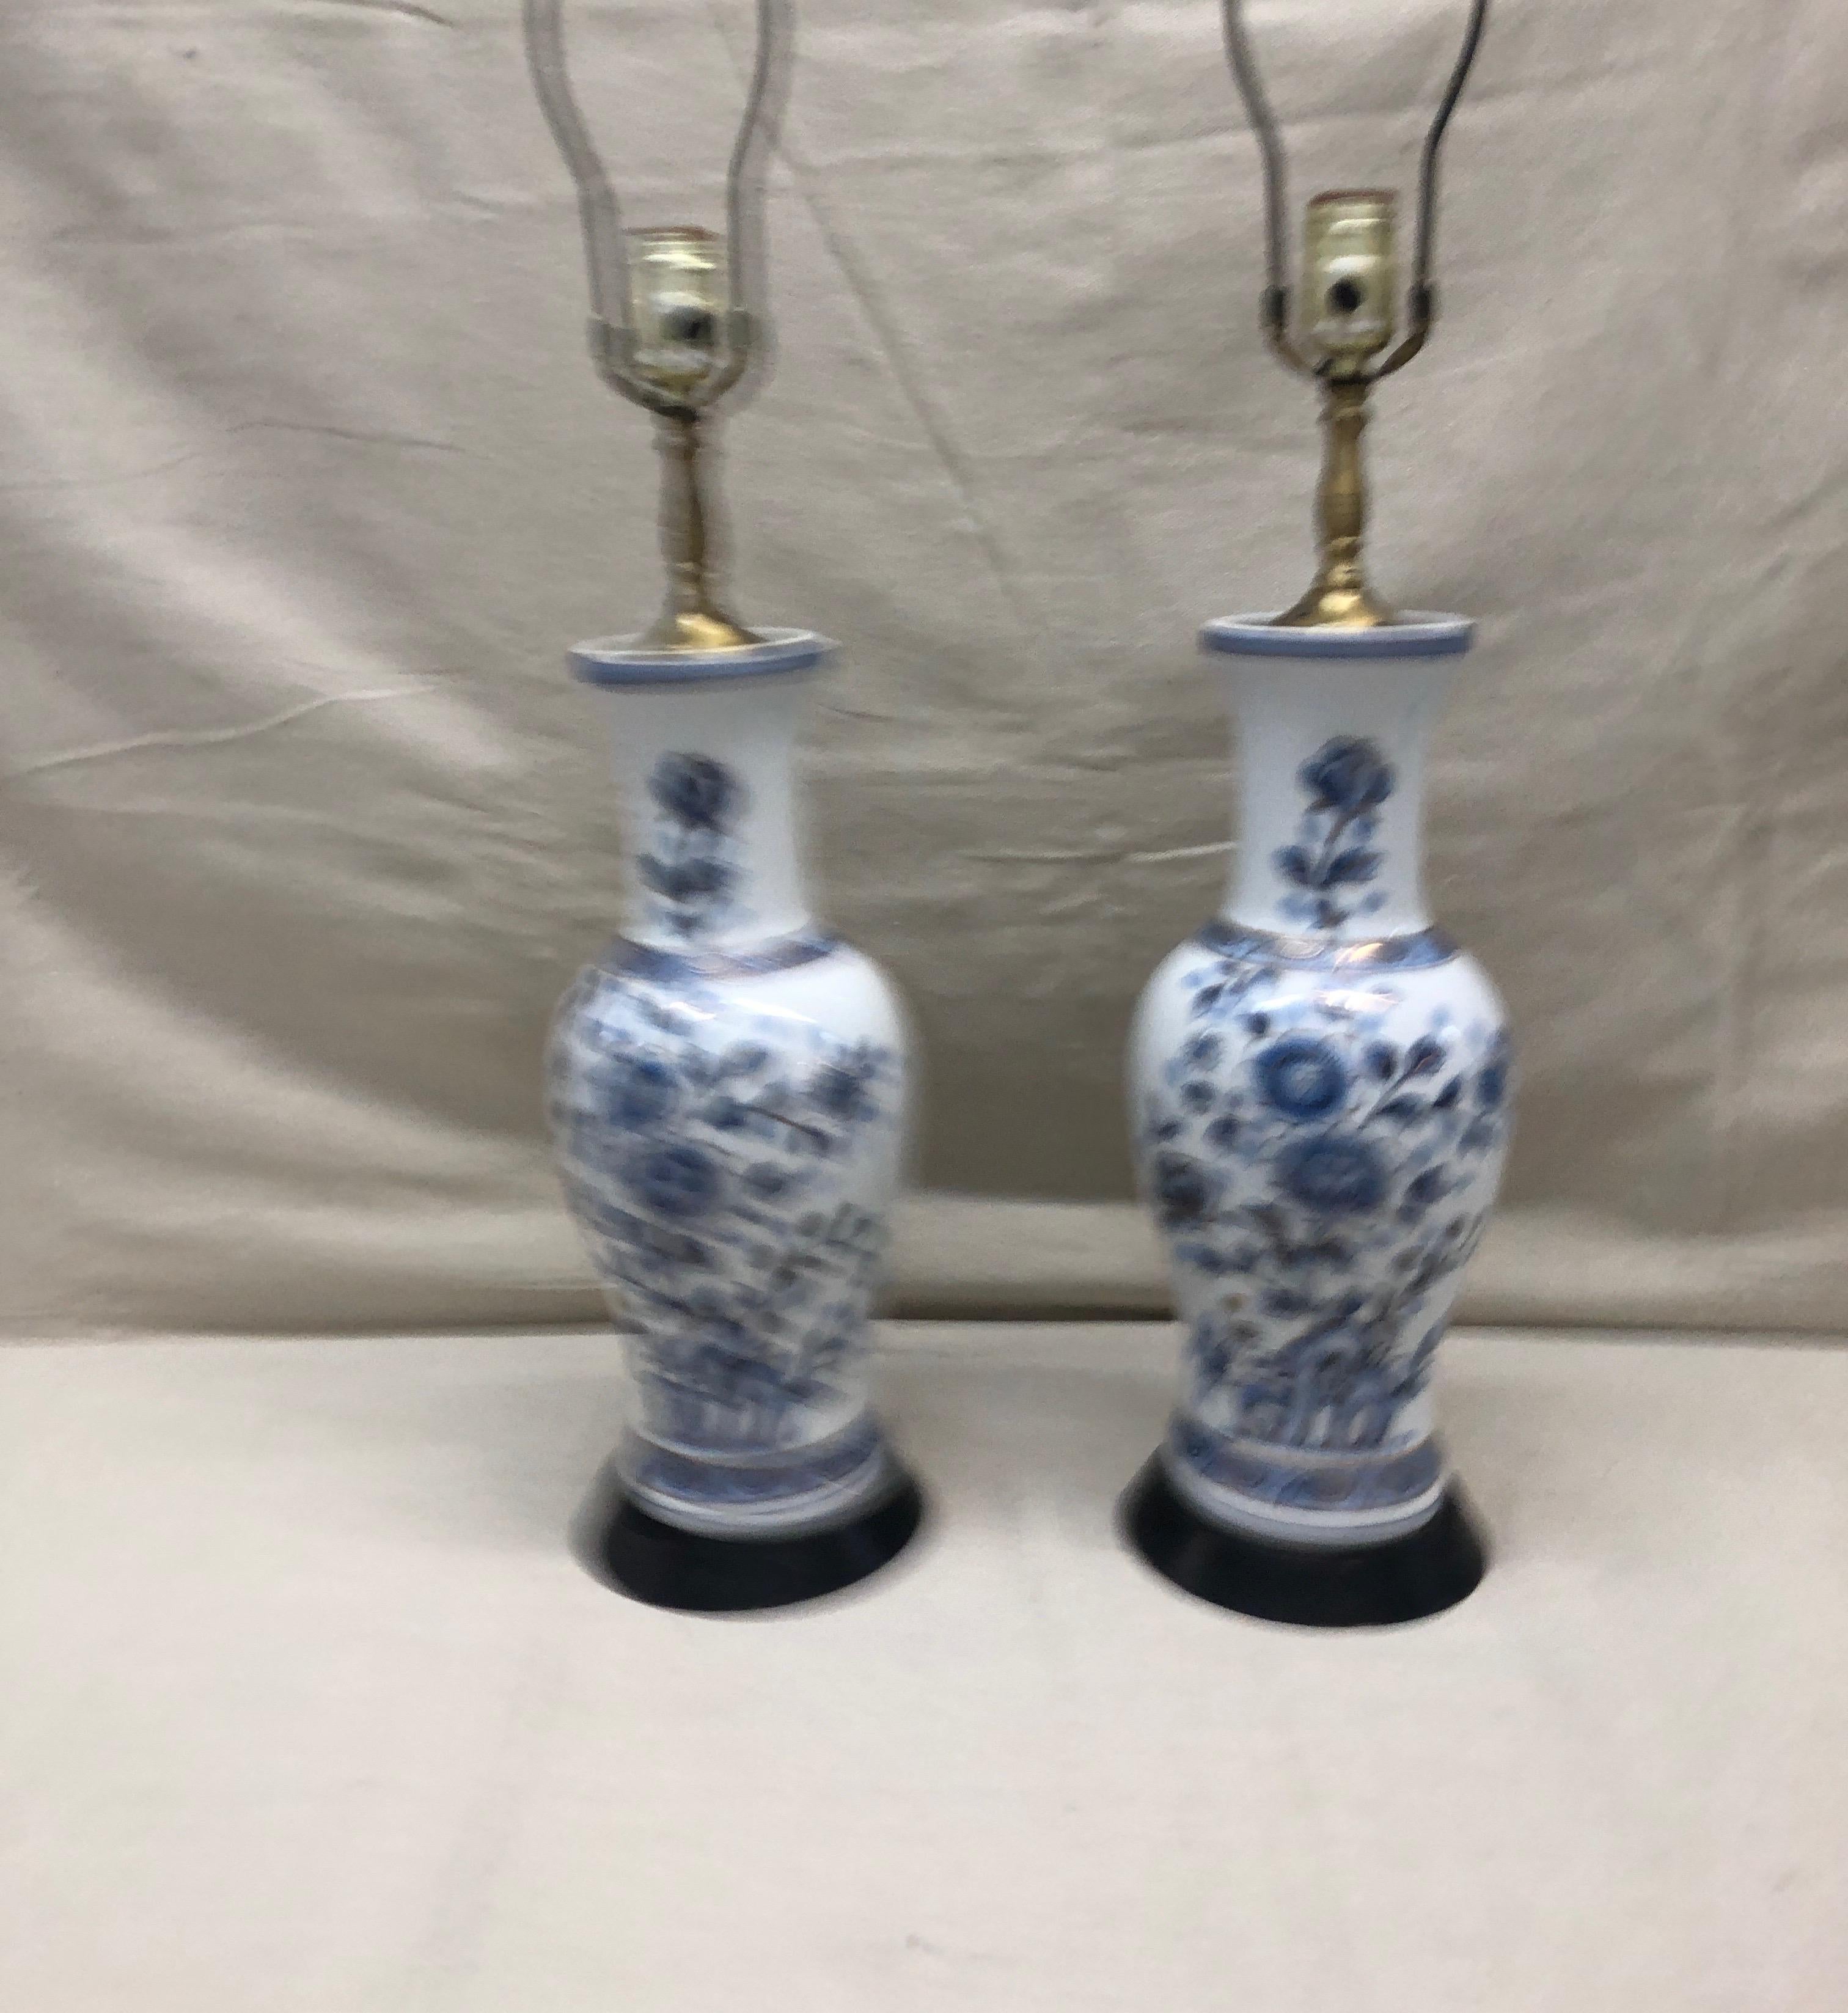 Pair of vintage blue and white Imari table lamps,
floral pattern with gold outline details.
Size: 6” D x 27” H to top of harp.
Vase: 6” D x 15” H.